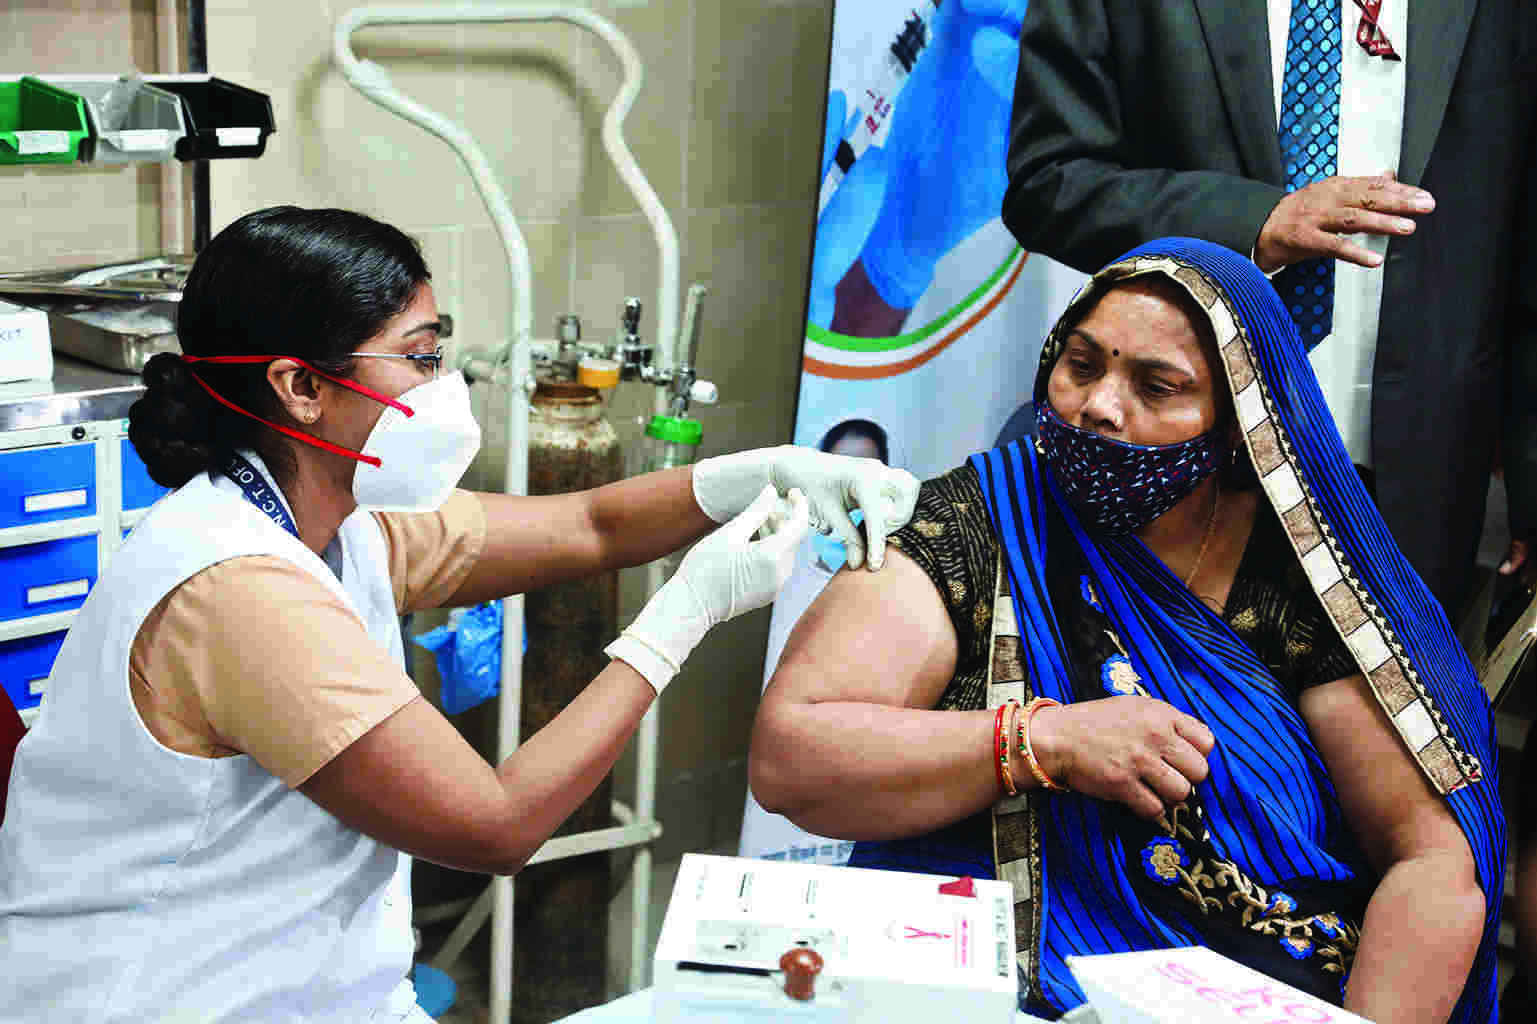 Hypertension most common co-morbidity: Delhi Hospital study on Covid-19 patients